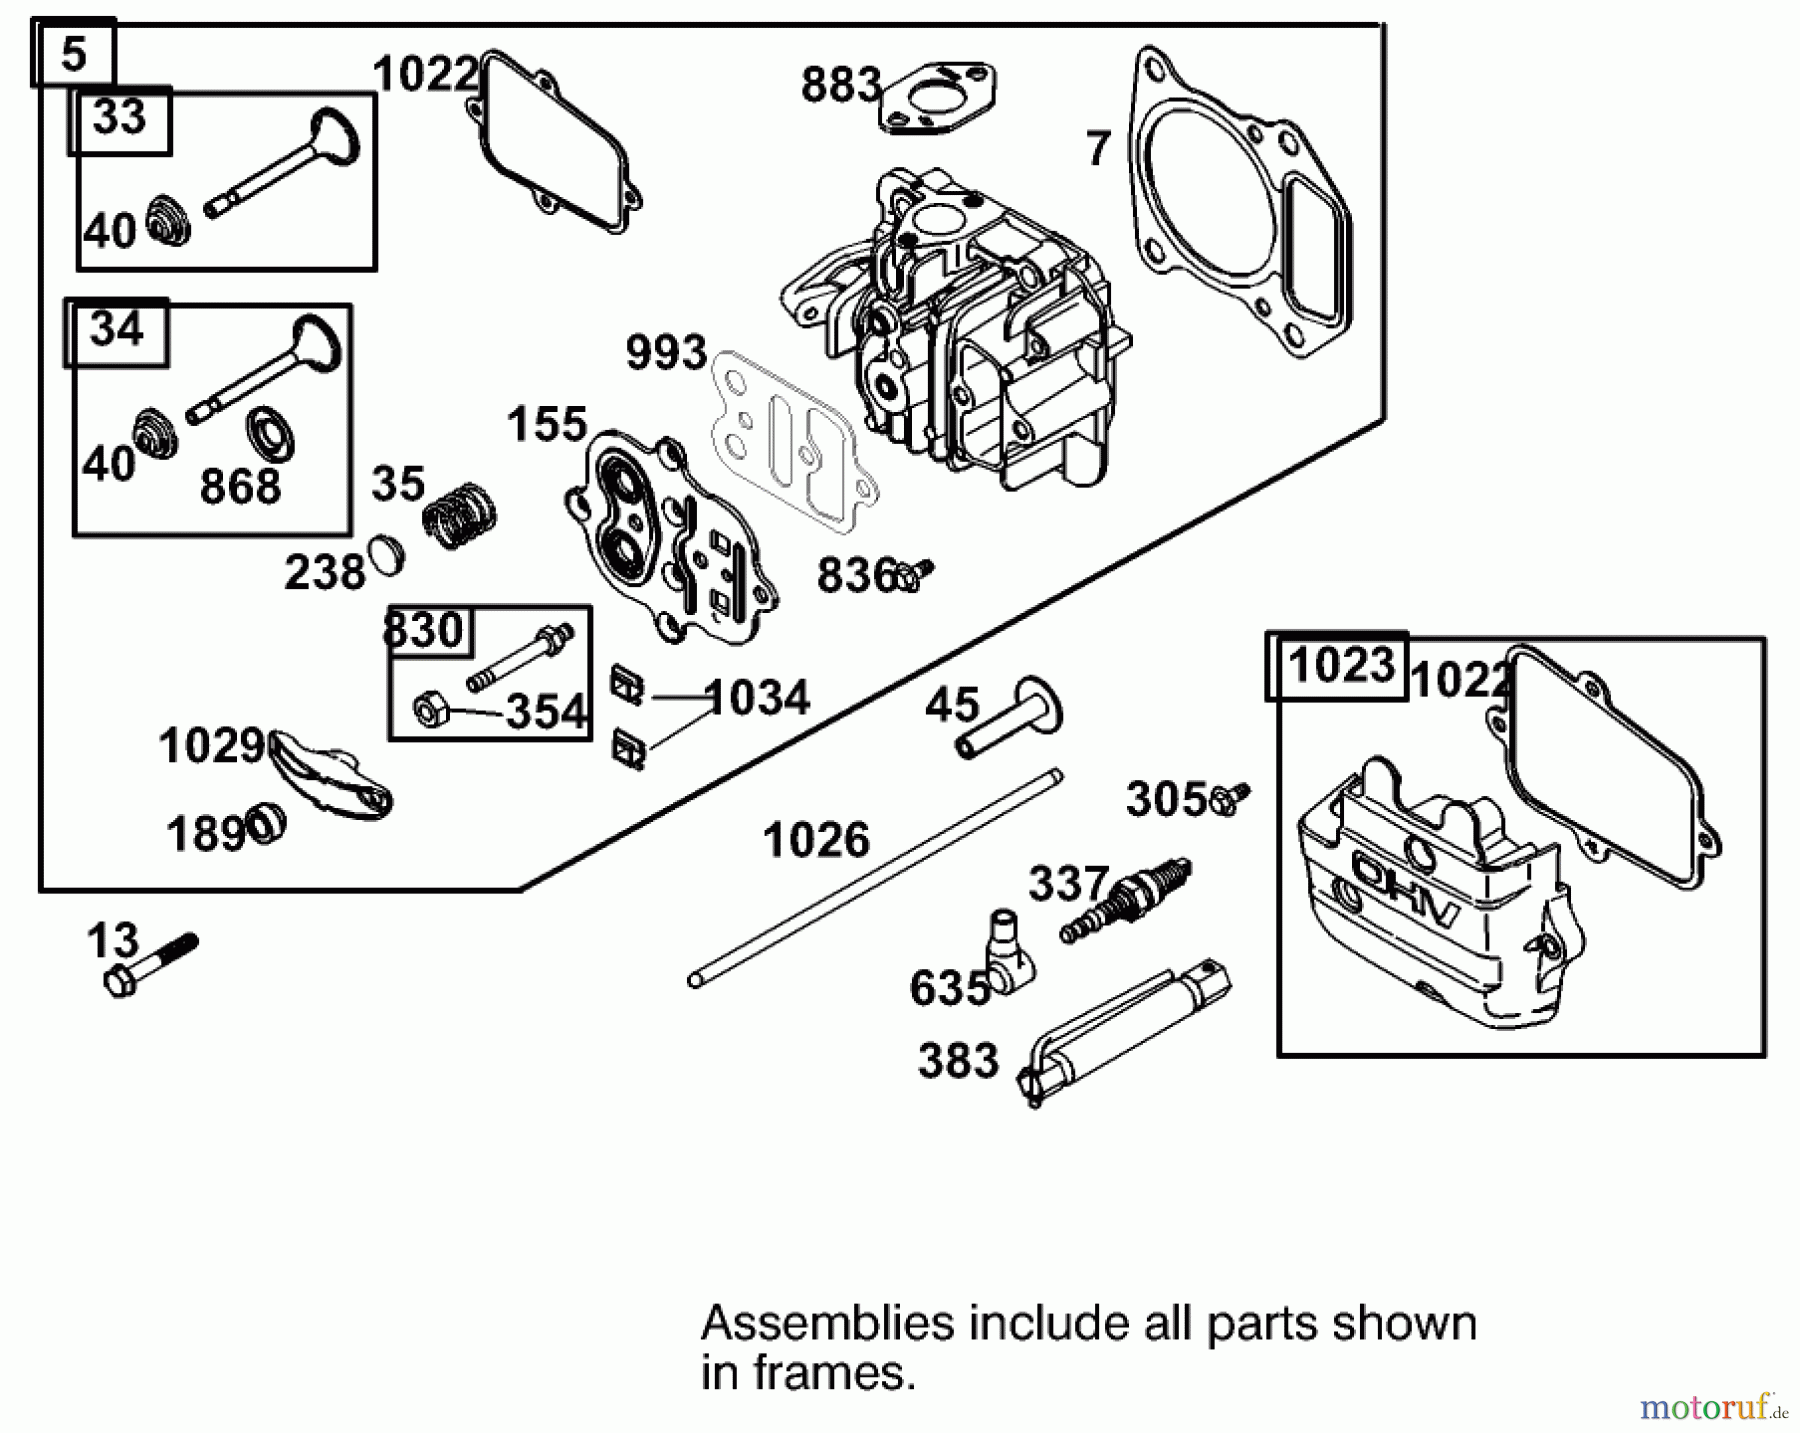  Toro Neu Accessories, Mower 105-1293 - Toro GTS 150 to 200 Conversion Kit, 1995-97 Super Recycler Lawnmowers CYLINDER HEAD ASSEMBLY ENGINE GTS-200